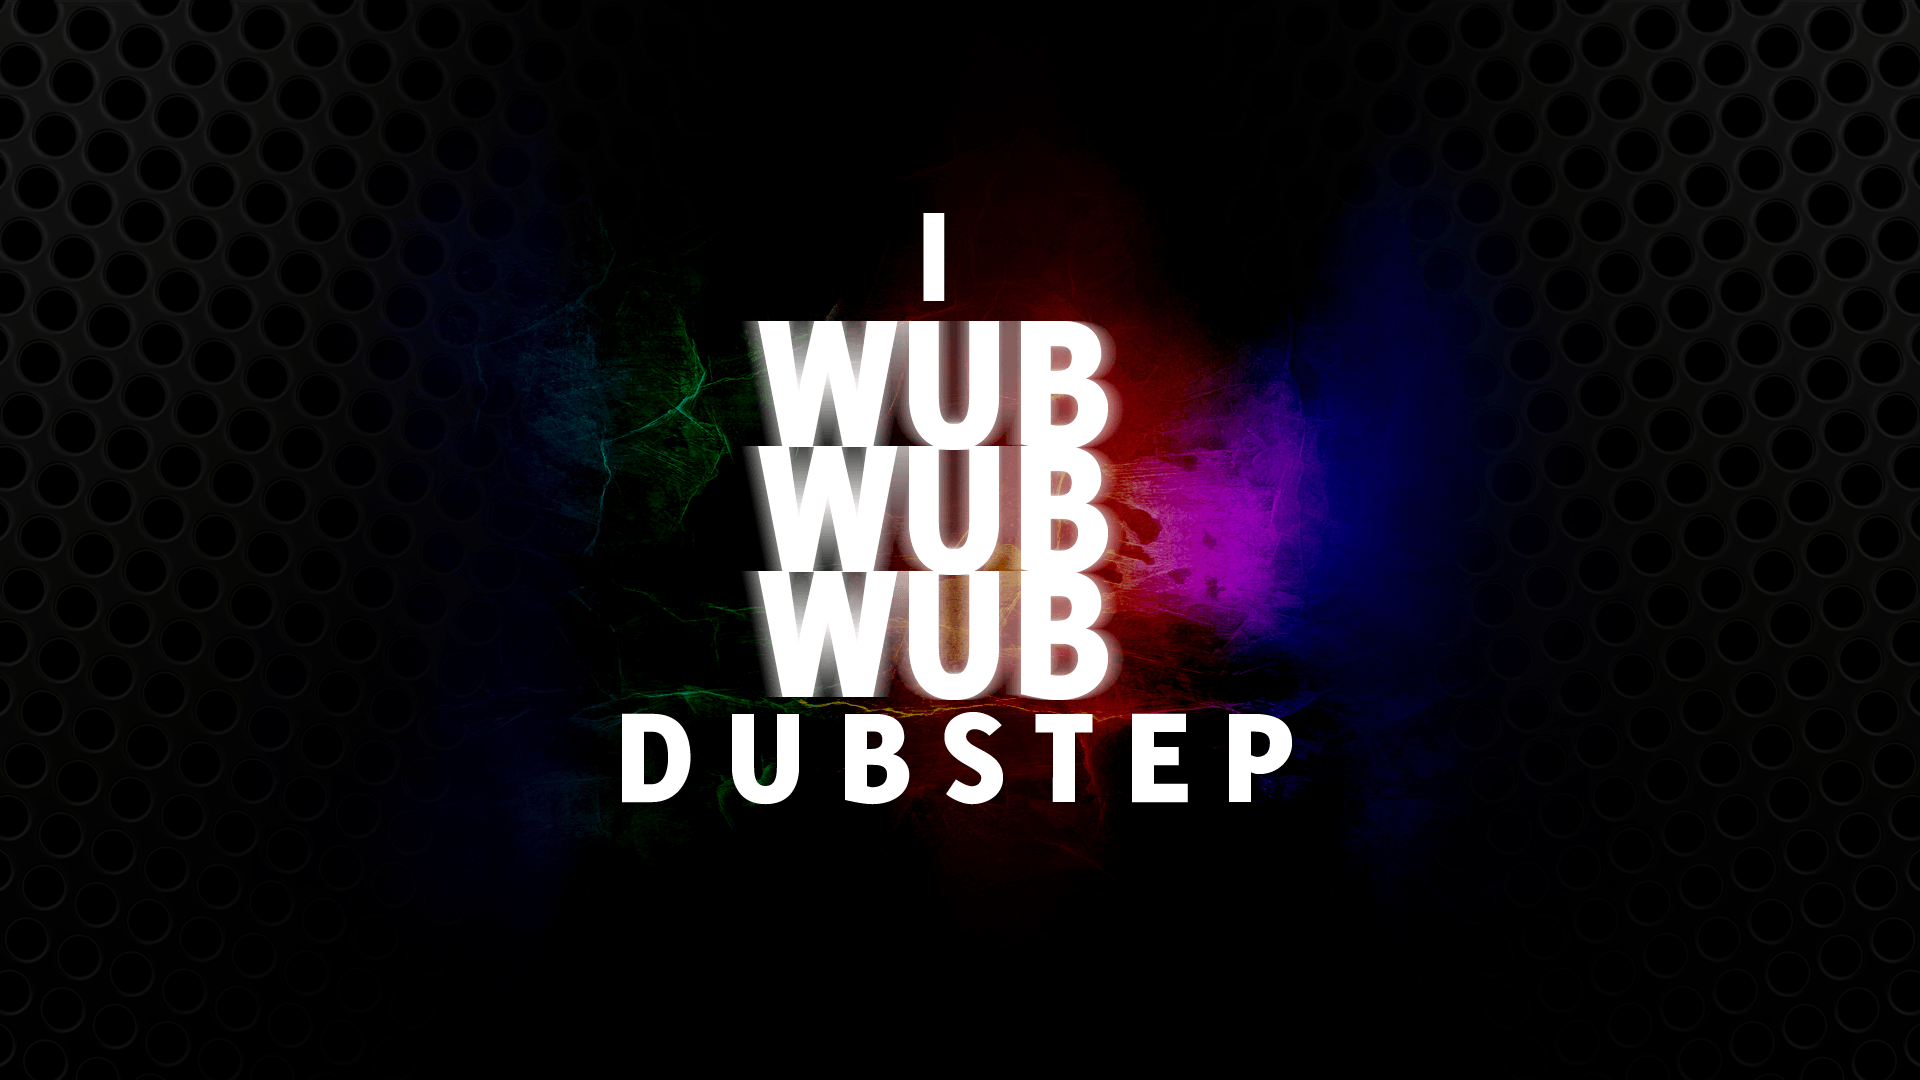 Wallpapers For > Live Dubstep Wallpapers Hd